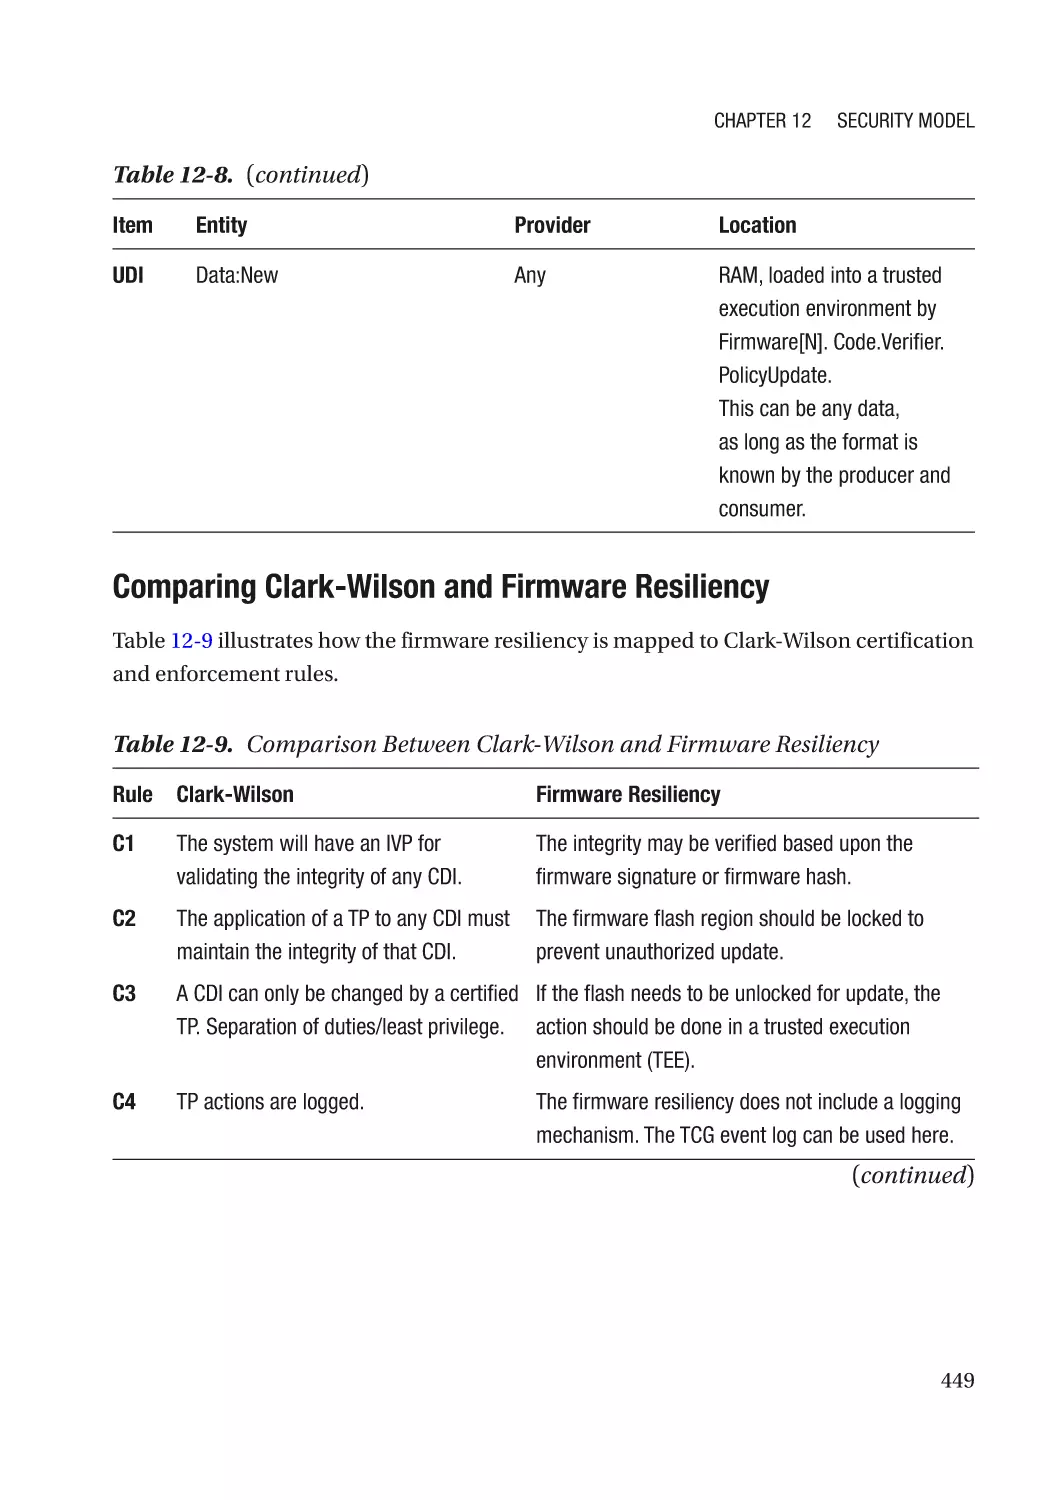 Comparing Clark-Wilson and Firmware Resiliency